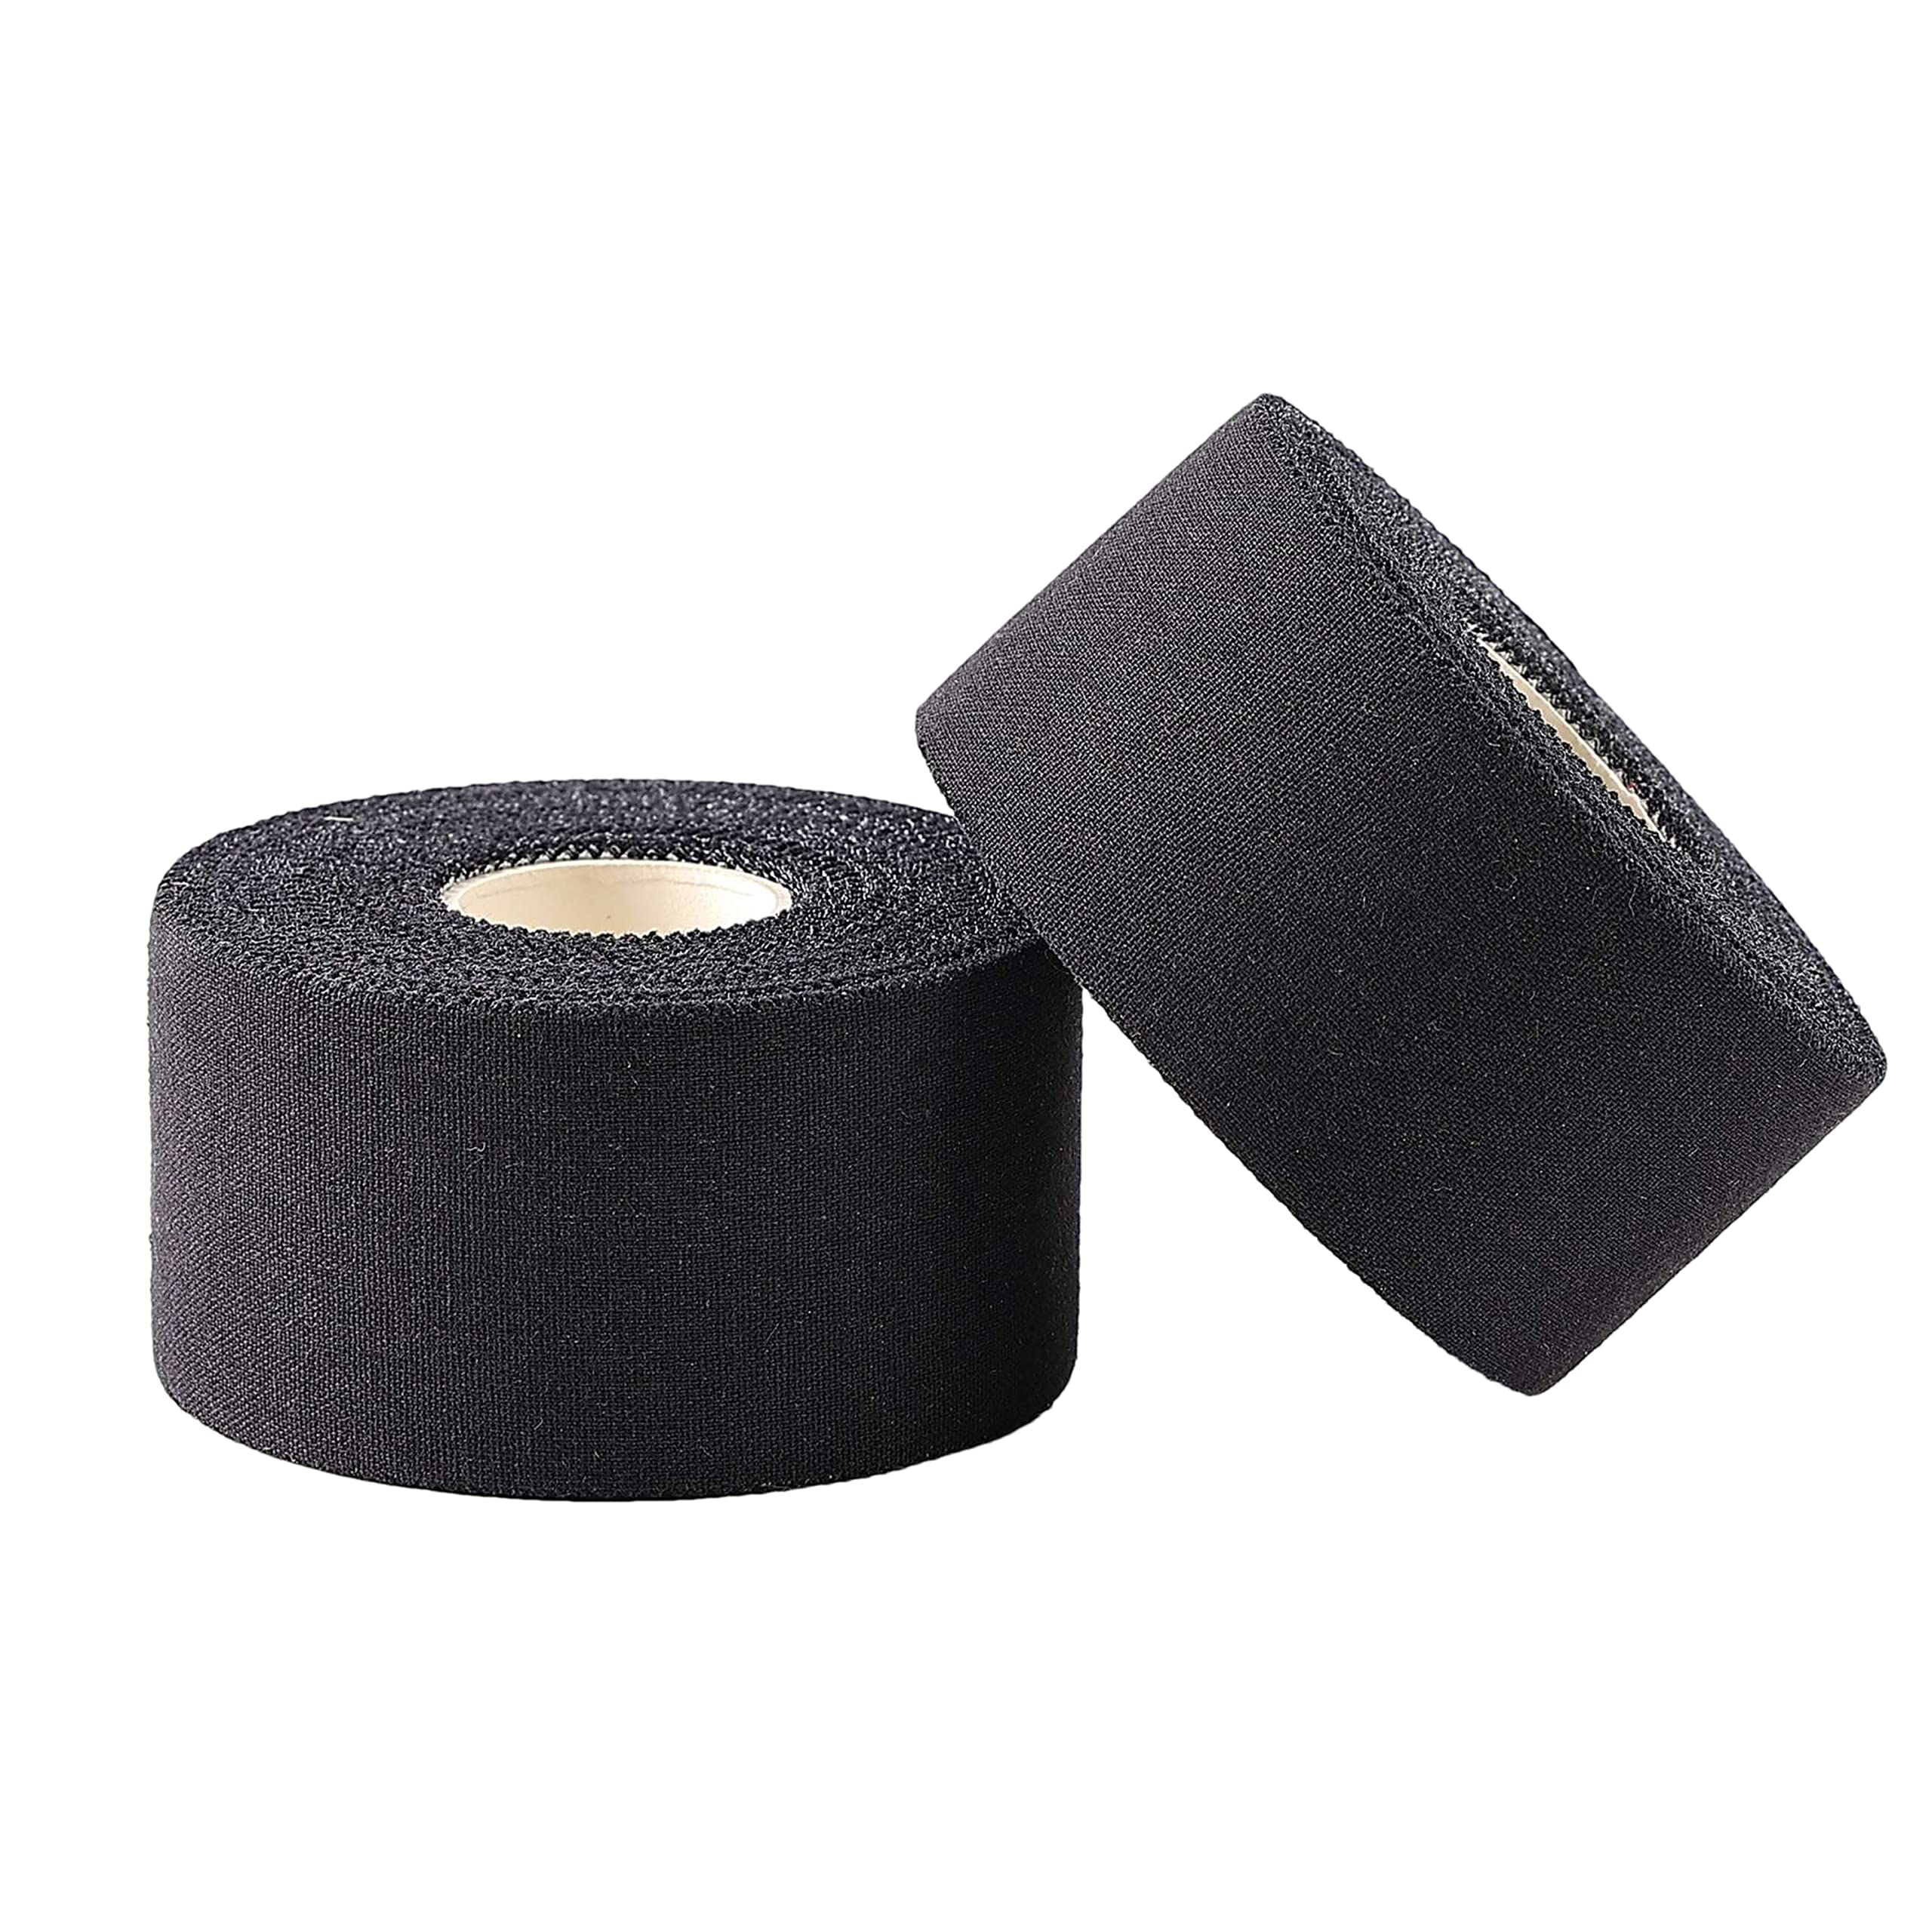 Popbop (2 Pack) Black Athletic Sports Tape, Very Strong Adhesive and Hypoallergenic Breathable Cotton Sports Tape for Bats, Tennis and Boxing